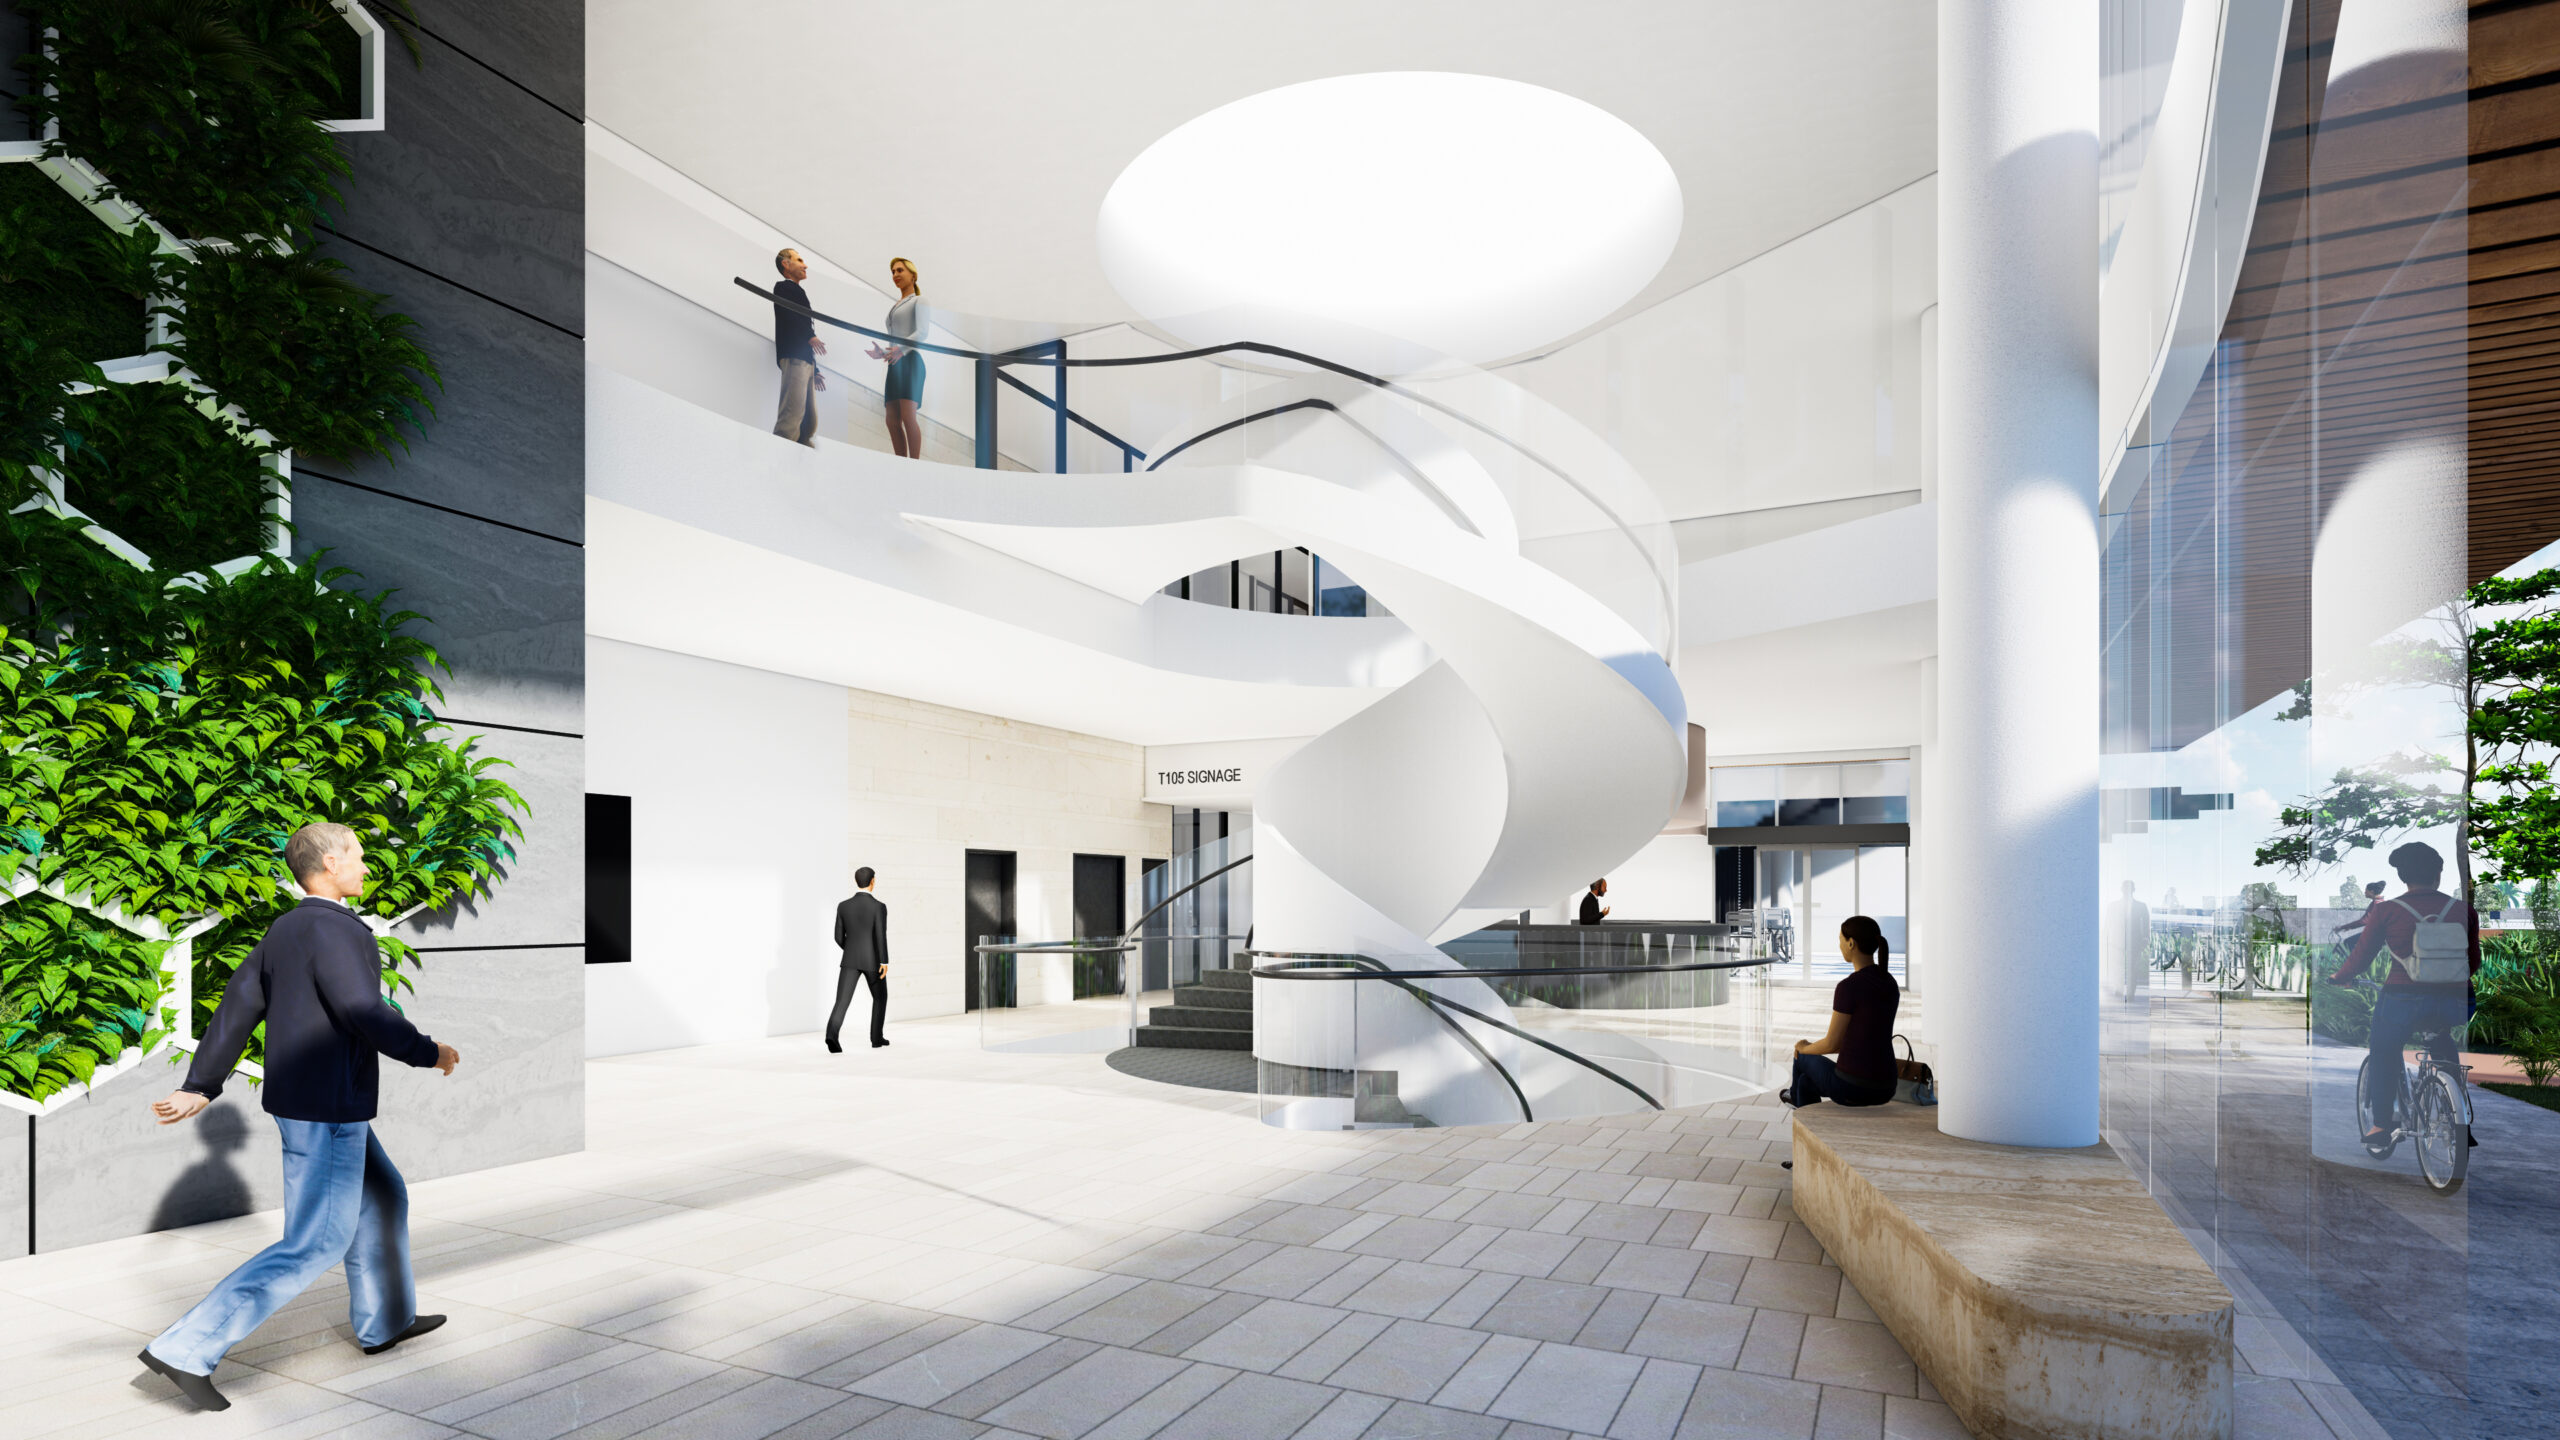 Interior of the the Gold Coast Centre for Medical Excellence building showcasing a large green wall on the left and a central white spiral staircase with a seamless glass balustrade. The staircase is illuminated from above through a circular cutout in the ceiling, featuring inset LED lights.